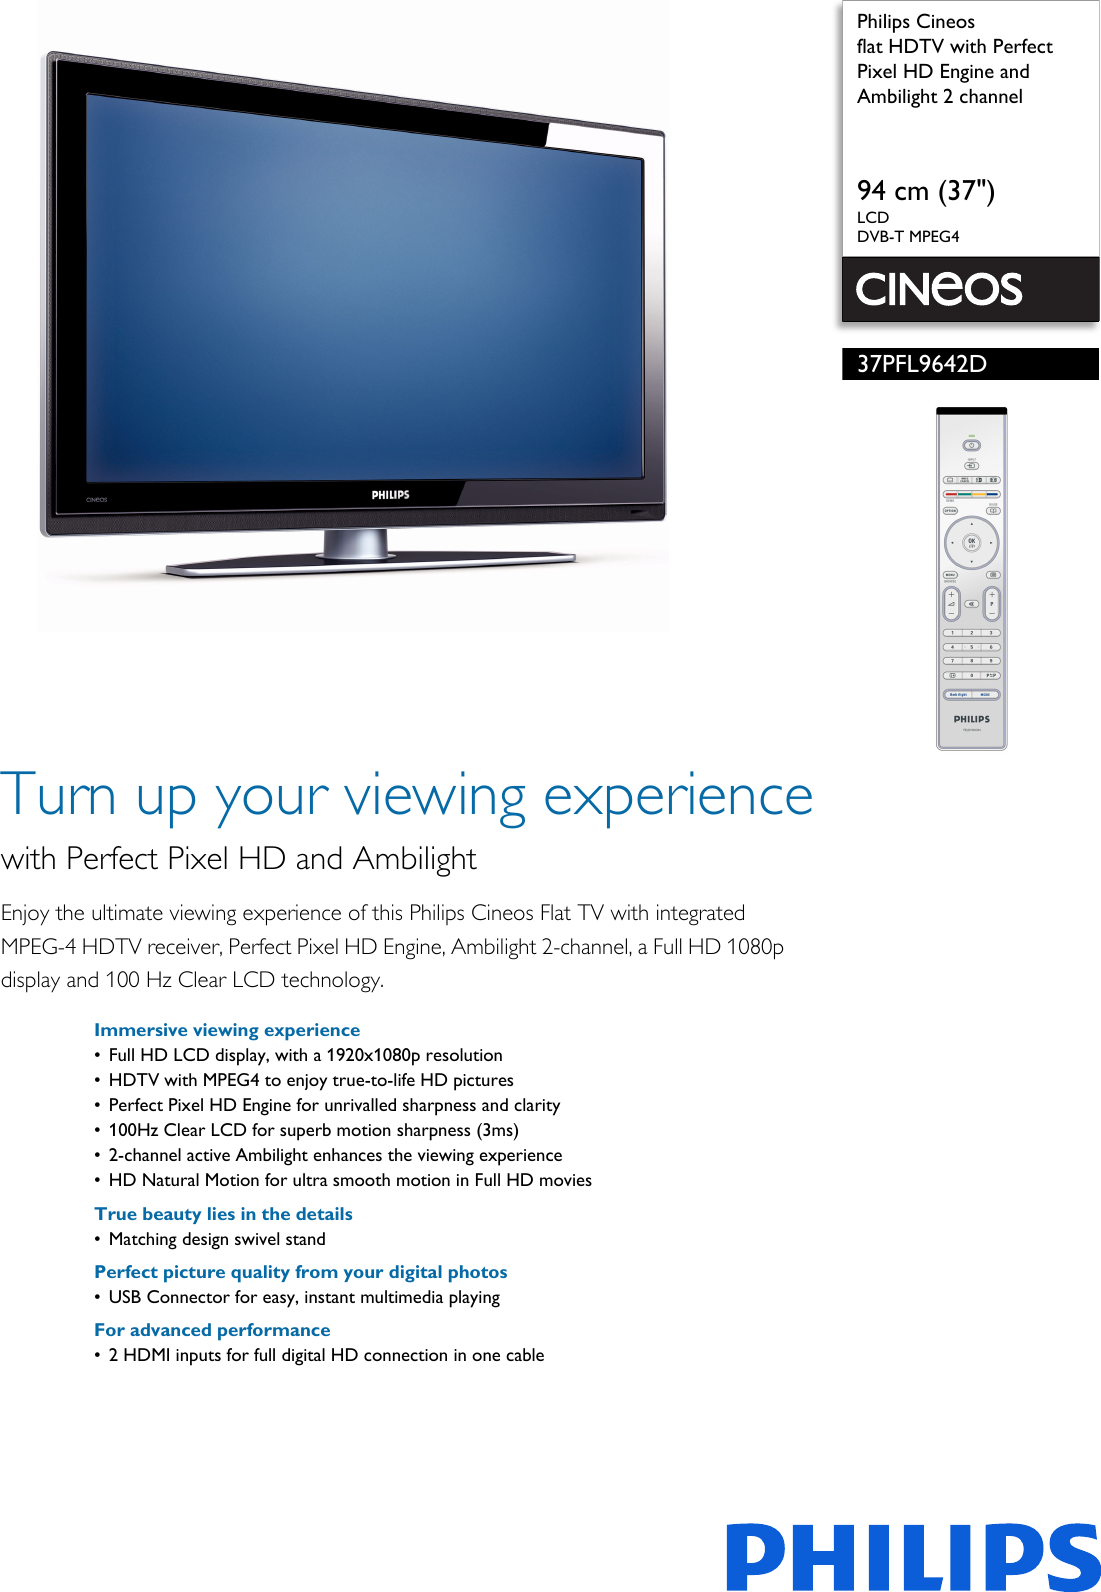 Page 1 of 3 - Philips 37PFL9642D/19 Flat HDTV With Perfect Pixel HD Engine And Ambilight 2 Channel User Manual Leaflet 37pfl9642d 19 Pss